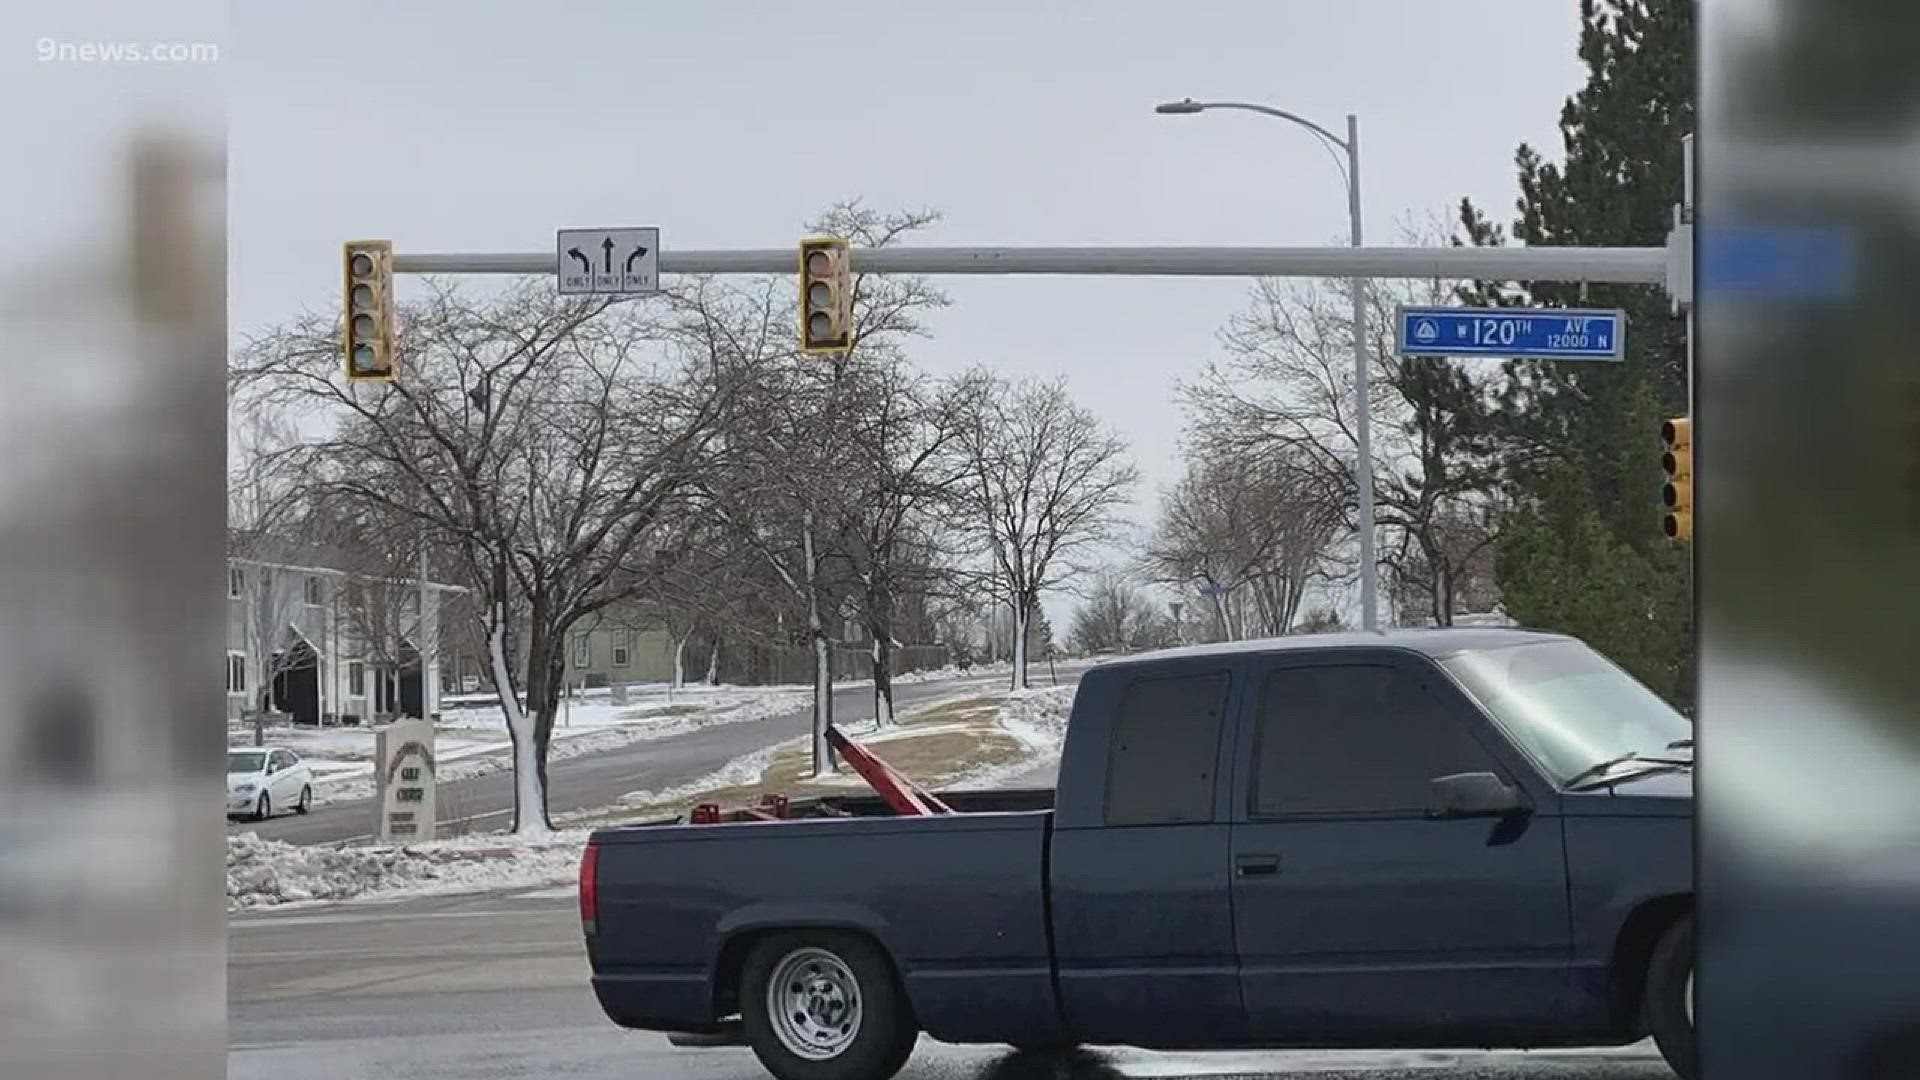 During the blizzard on Wednesday, it became virtually impossible to see traffic lights after they were coated with ice.